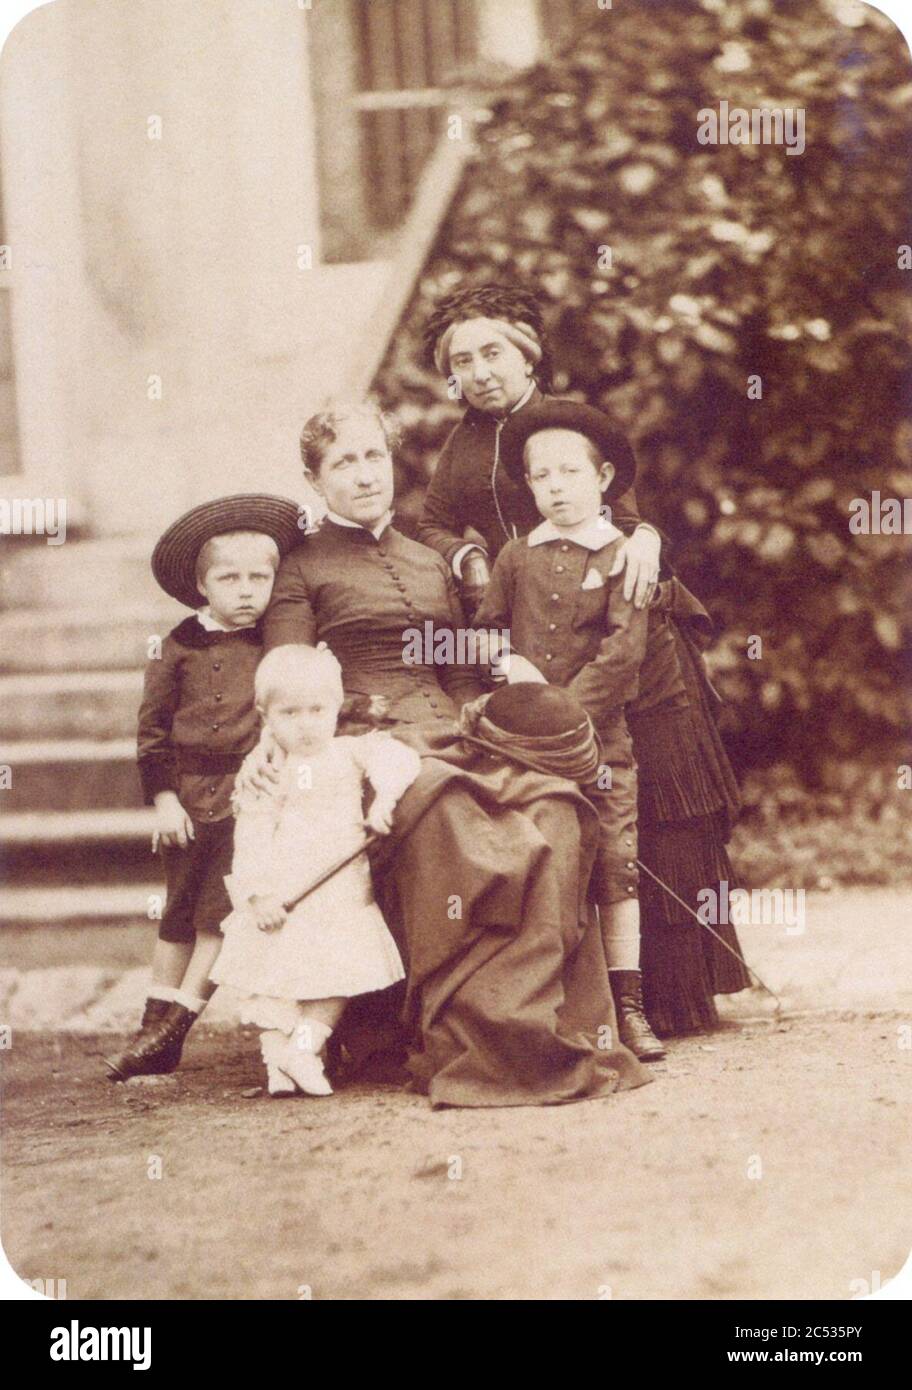 Isabel children and countess of barral. Stock Photo